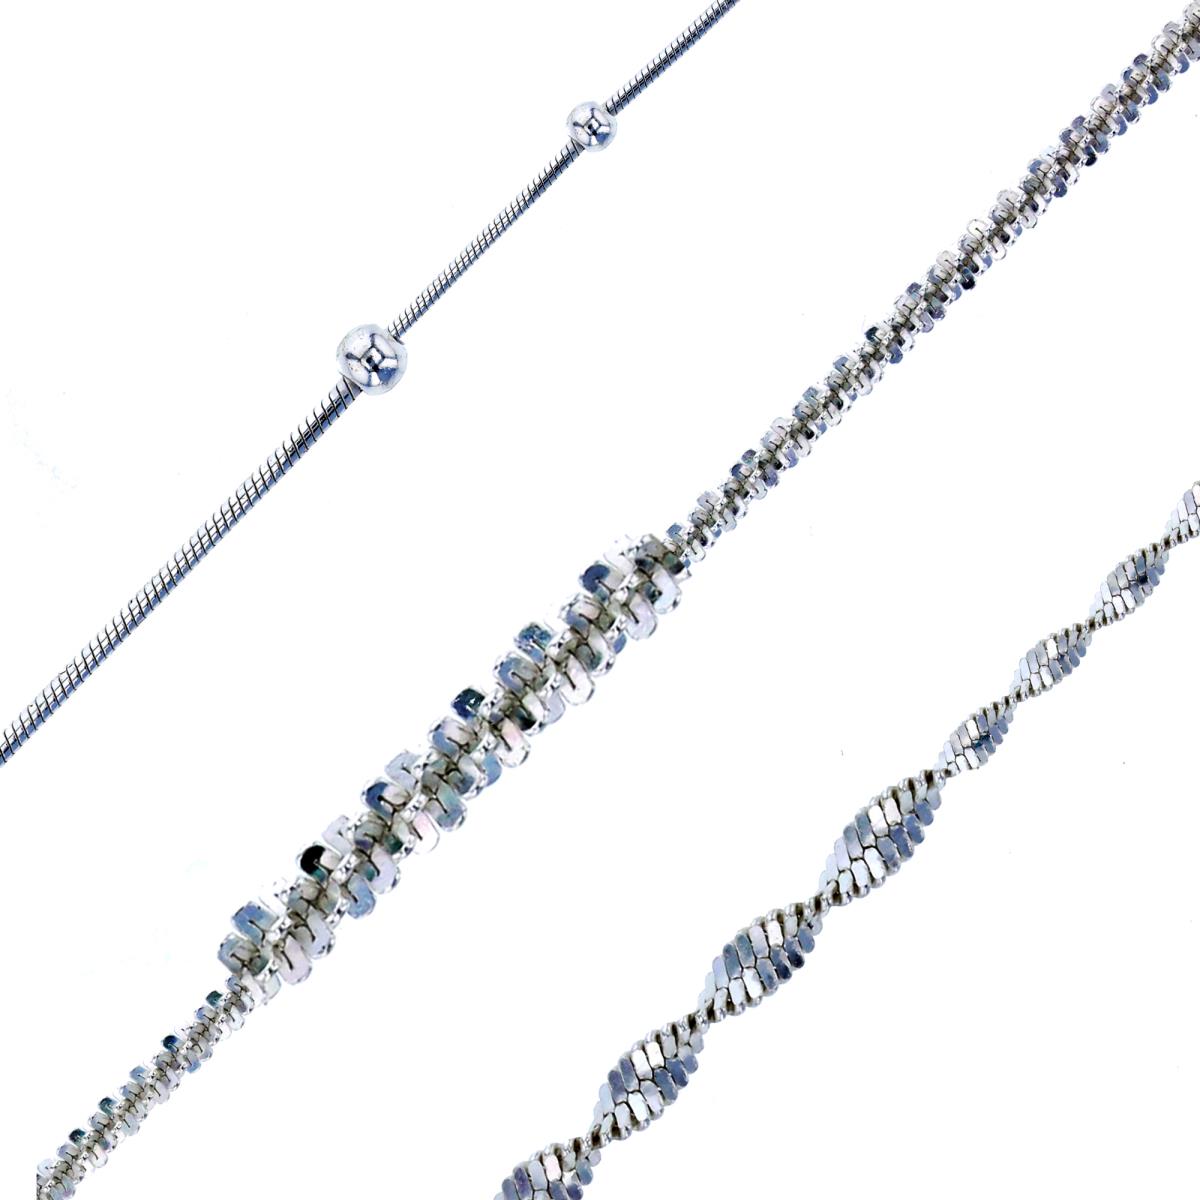 Sterling Silver Silver-Plated 1.50mm Sparkle Glitter, 3.00mm Snake Bead & 2.00mm DC Butterfly 7.5" Chain Bracelets (Set of 3)